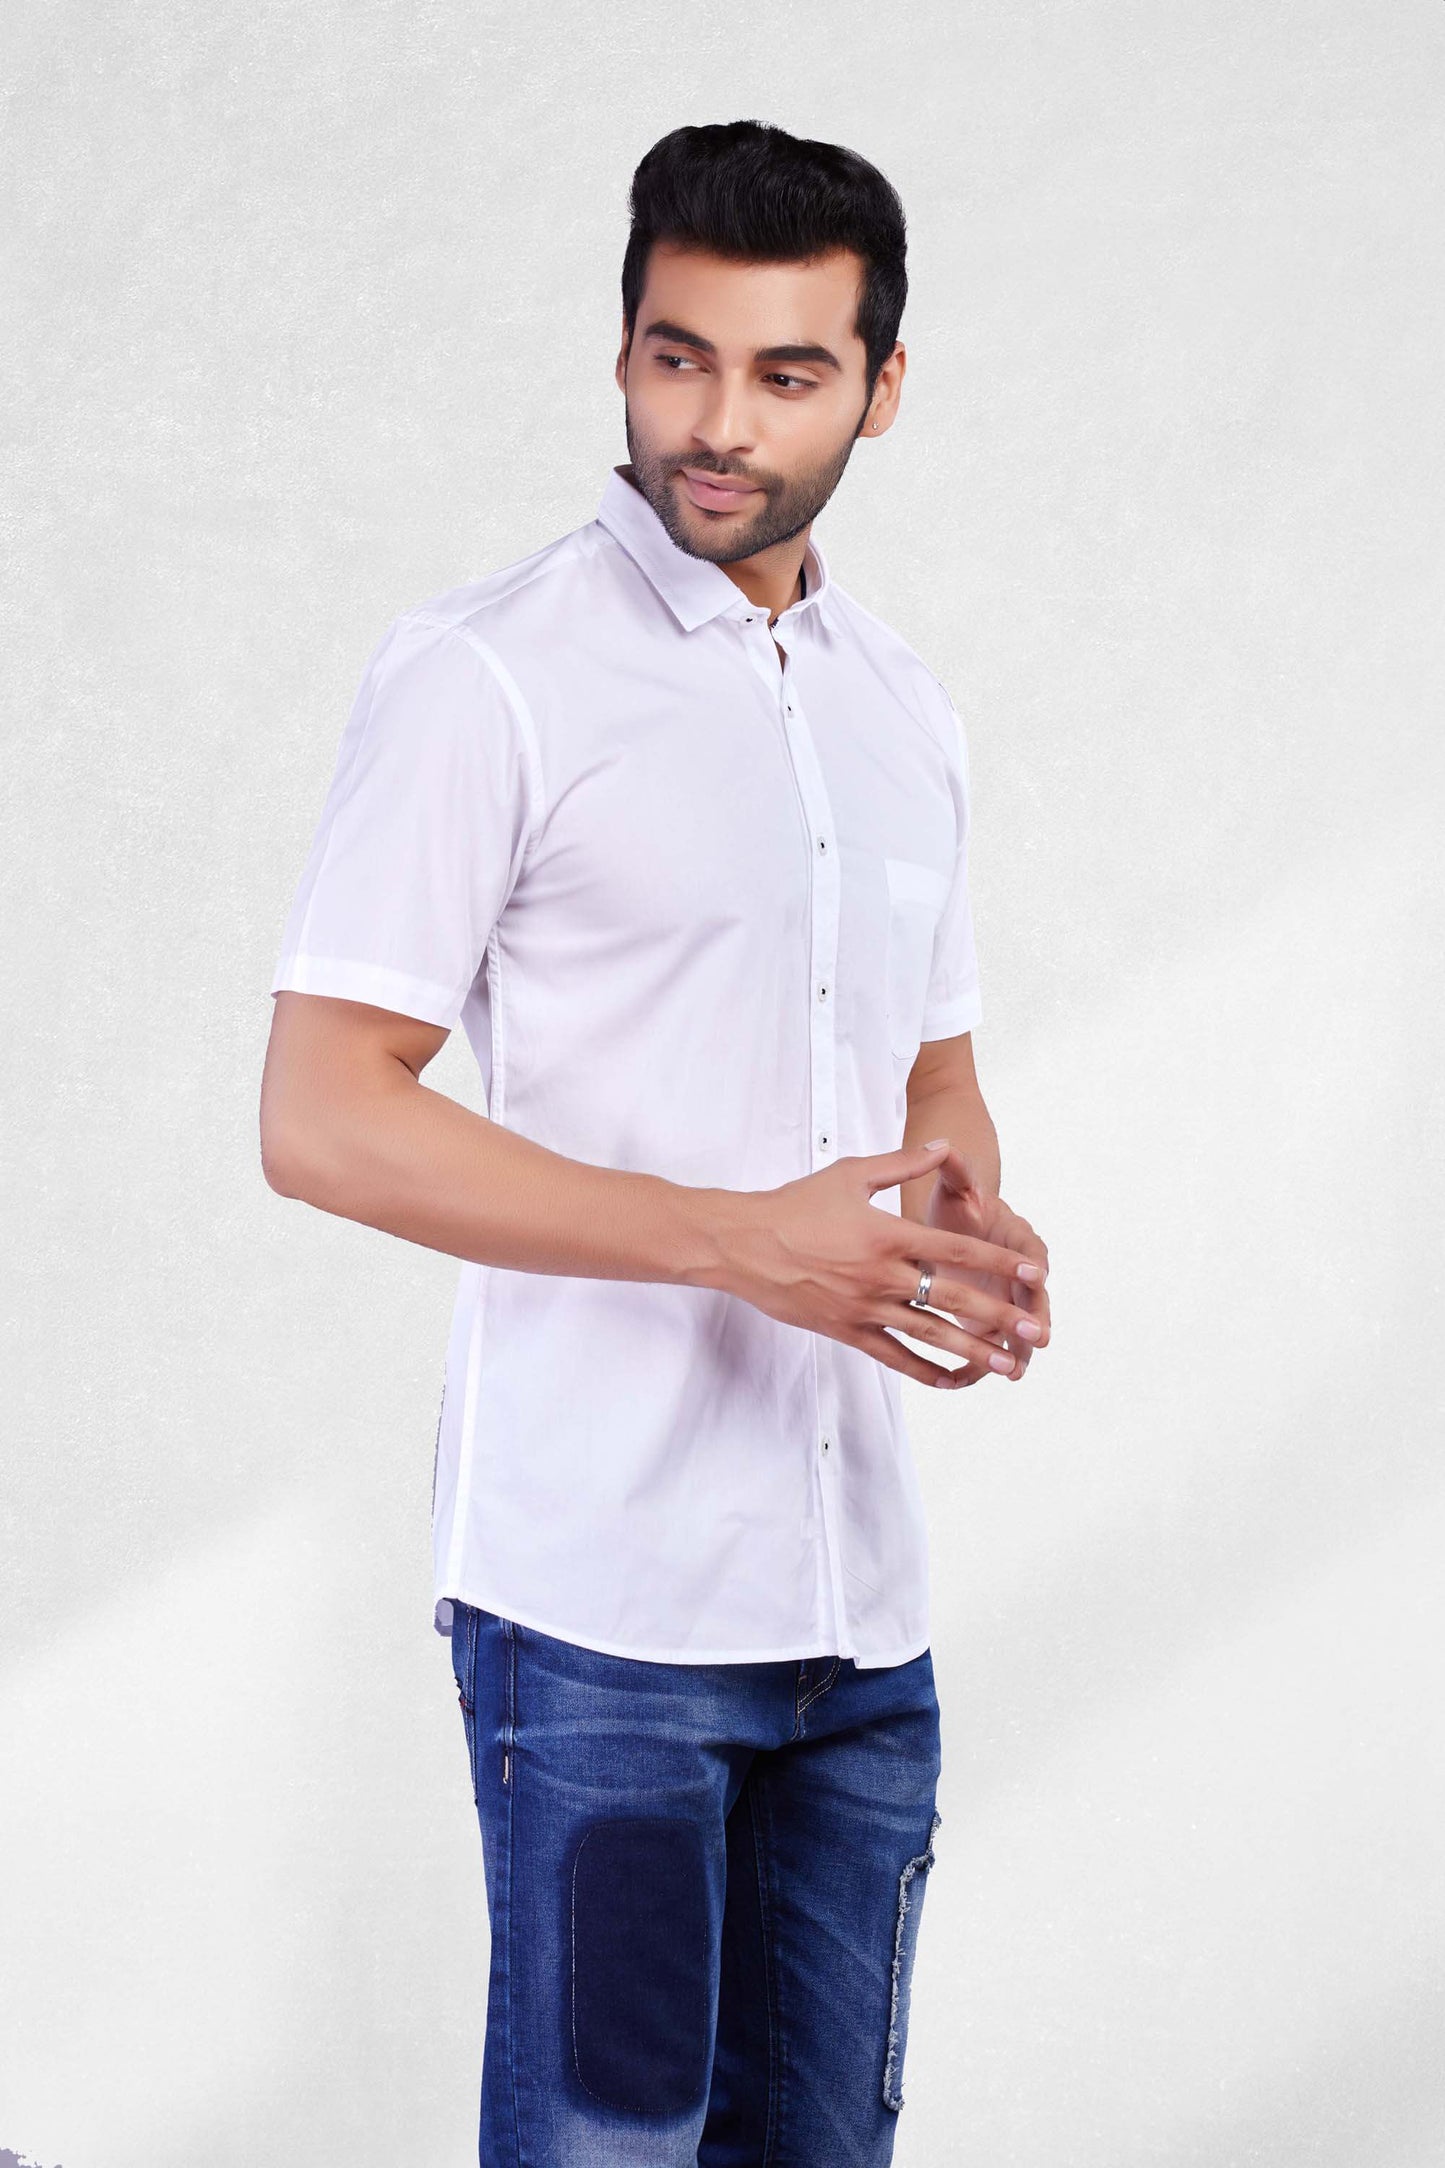 5thanfold Men's Casual Pure Cotton Half Sleeve Solid White Slim Fit Shirt